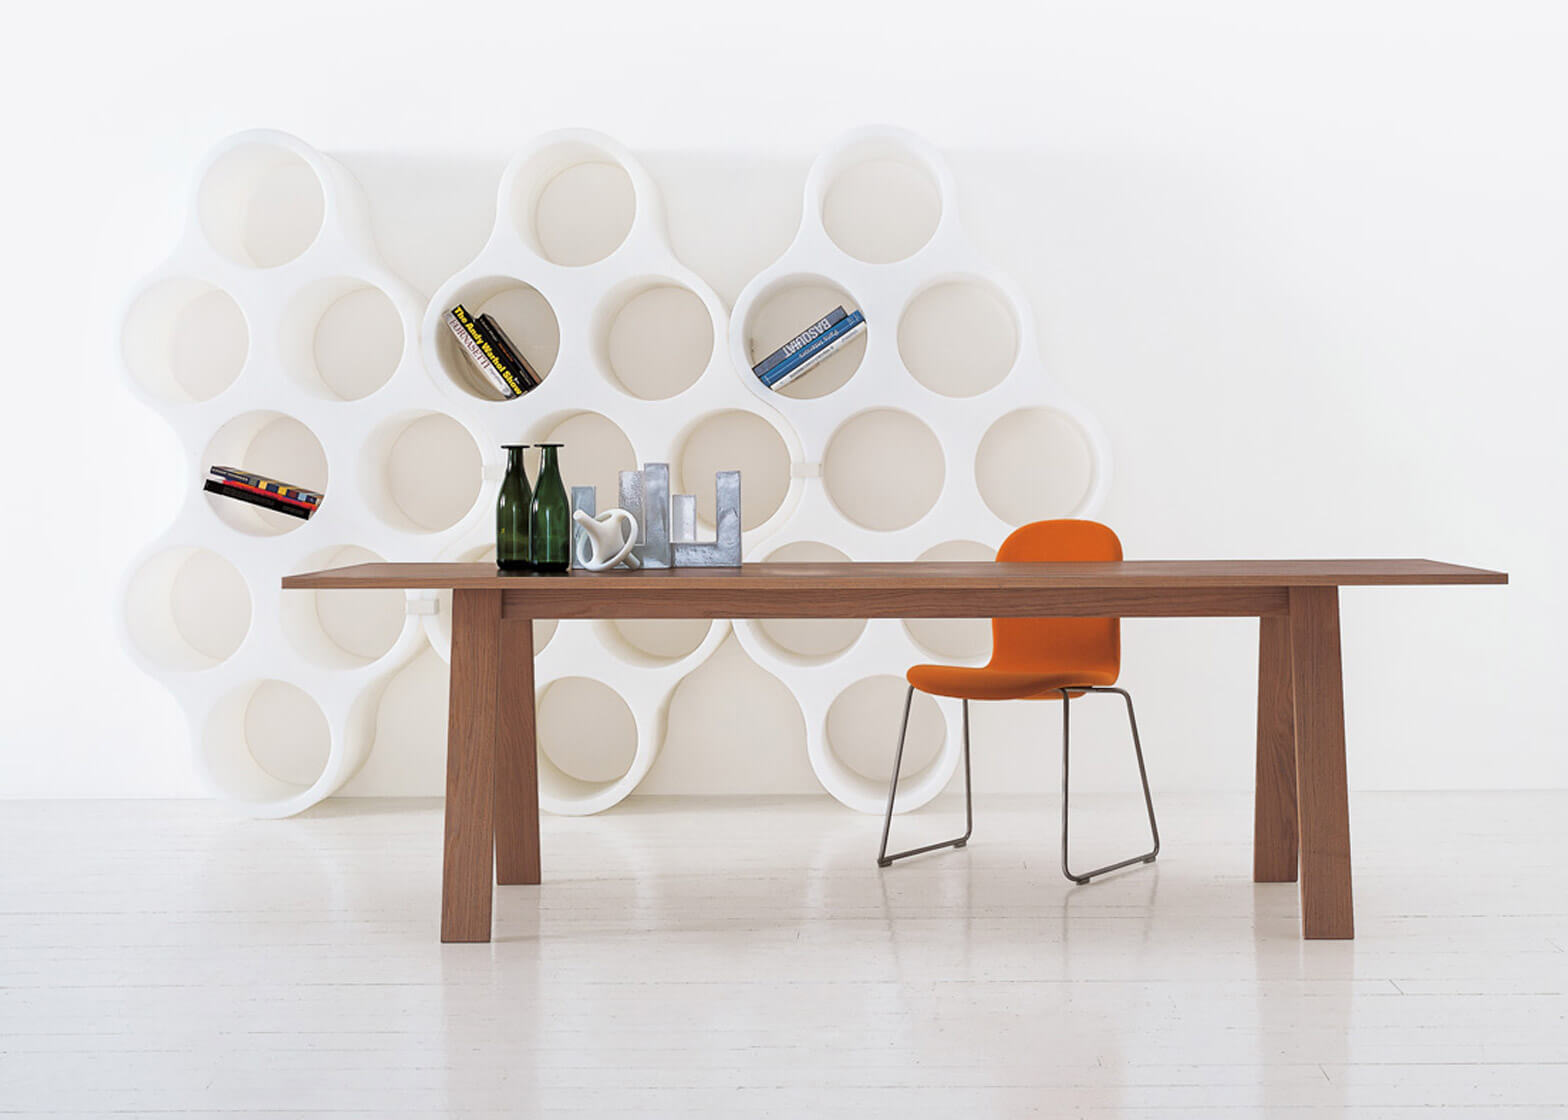 Capellini - Cloud Shelf by Ronnan and Erwan Bouroullec